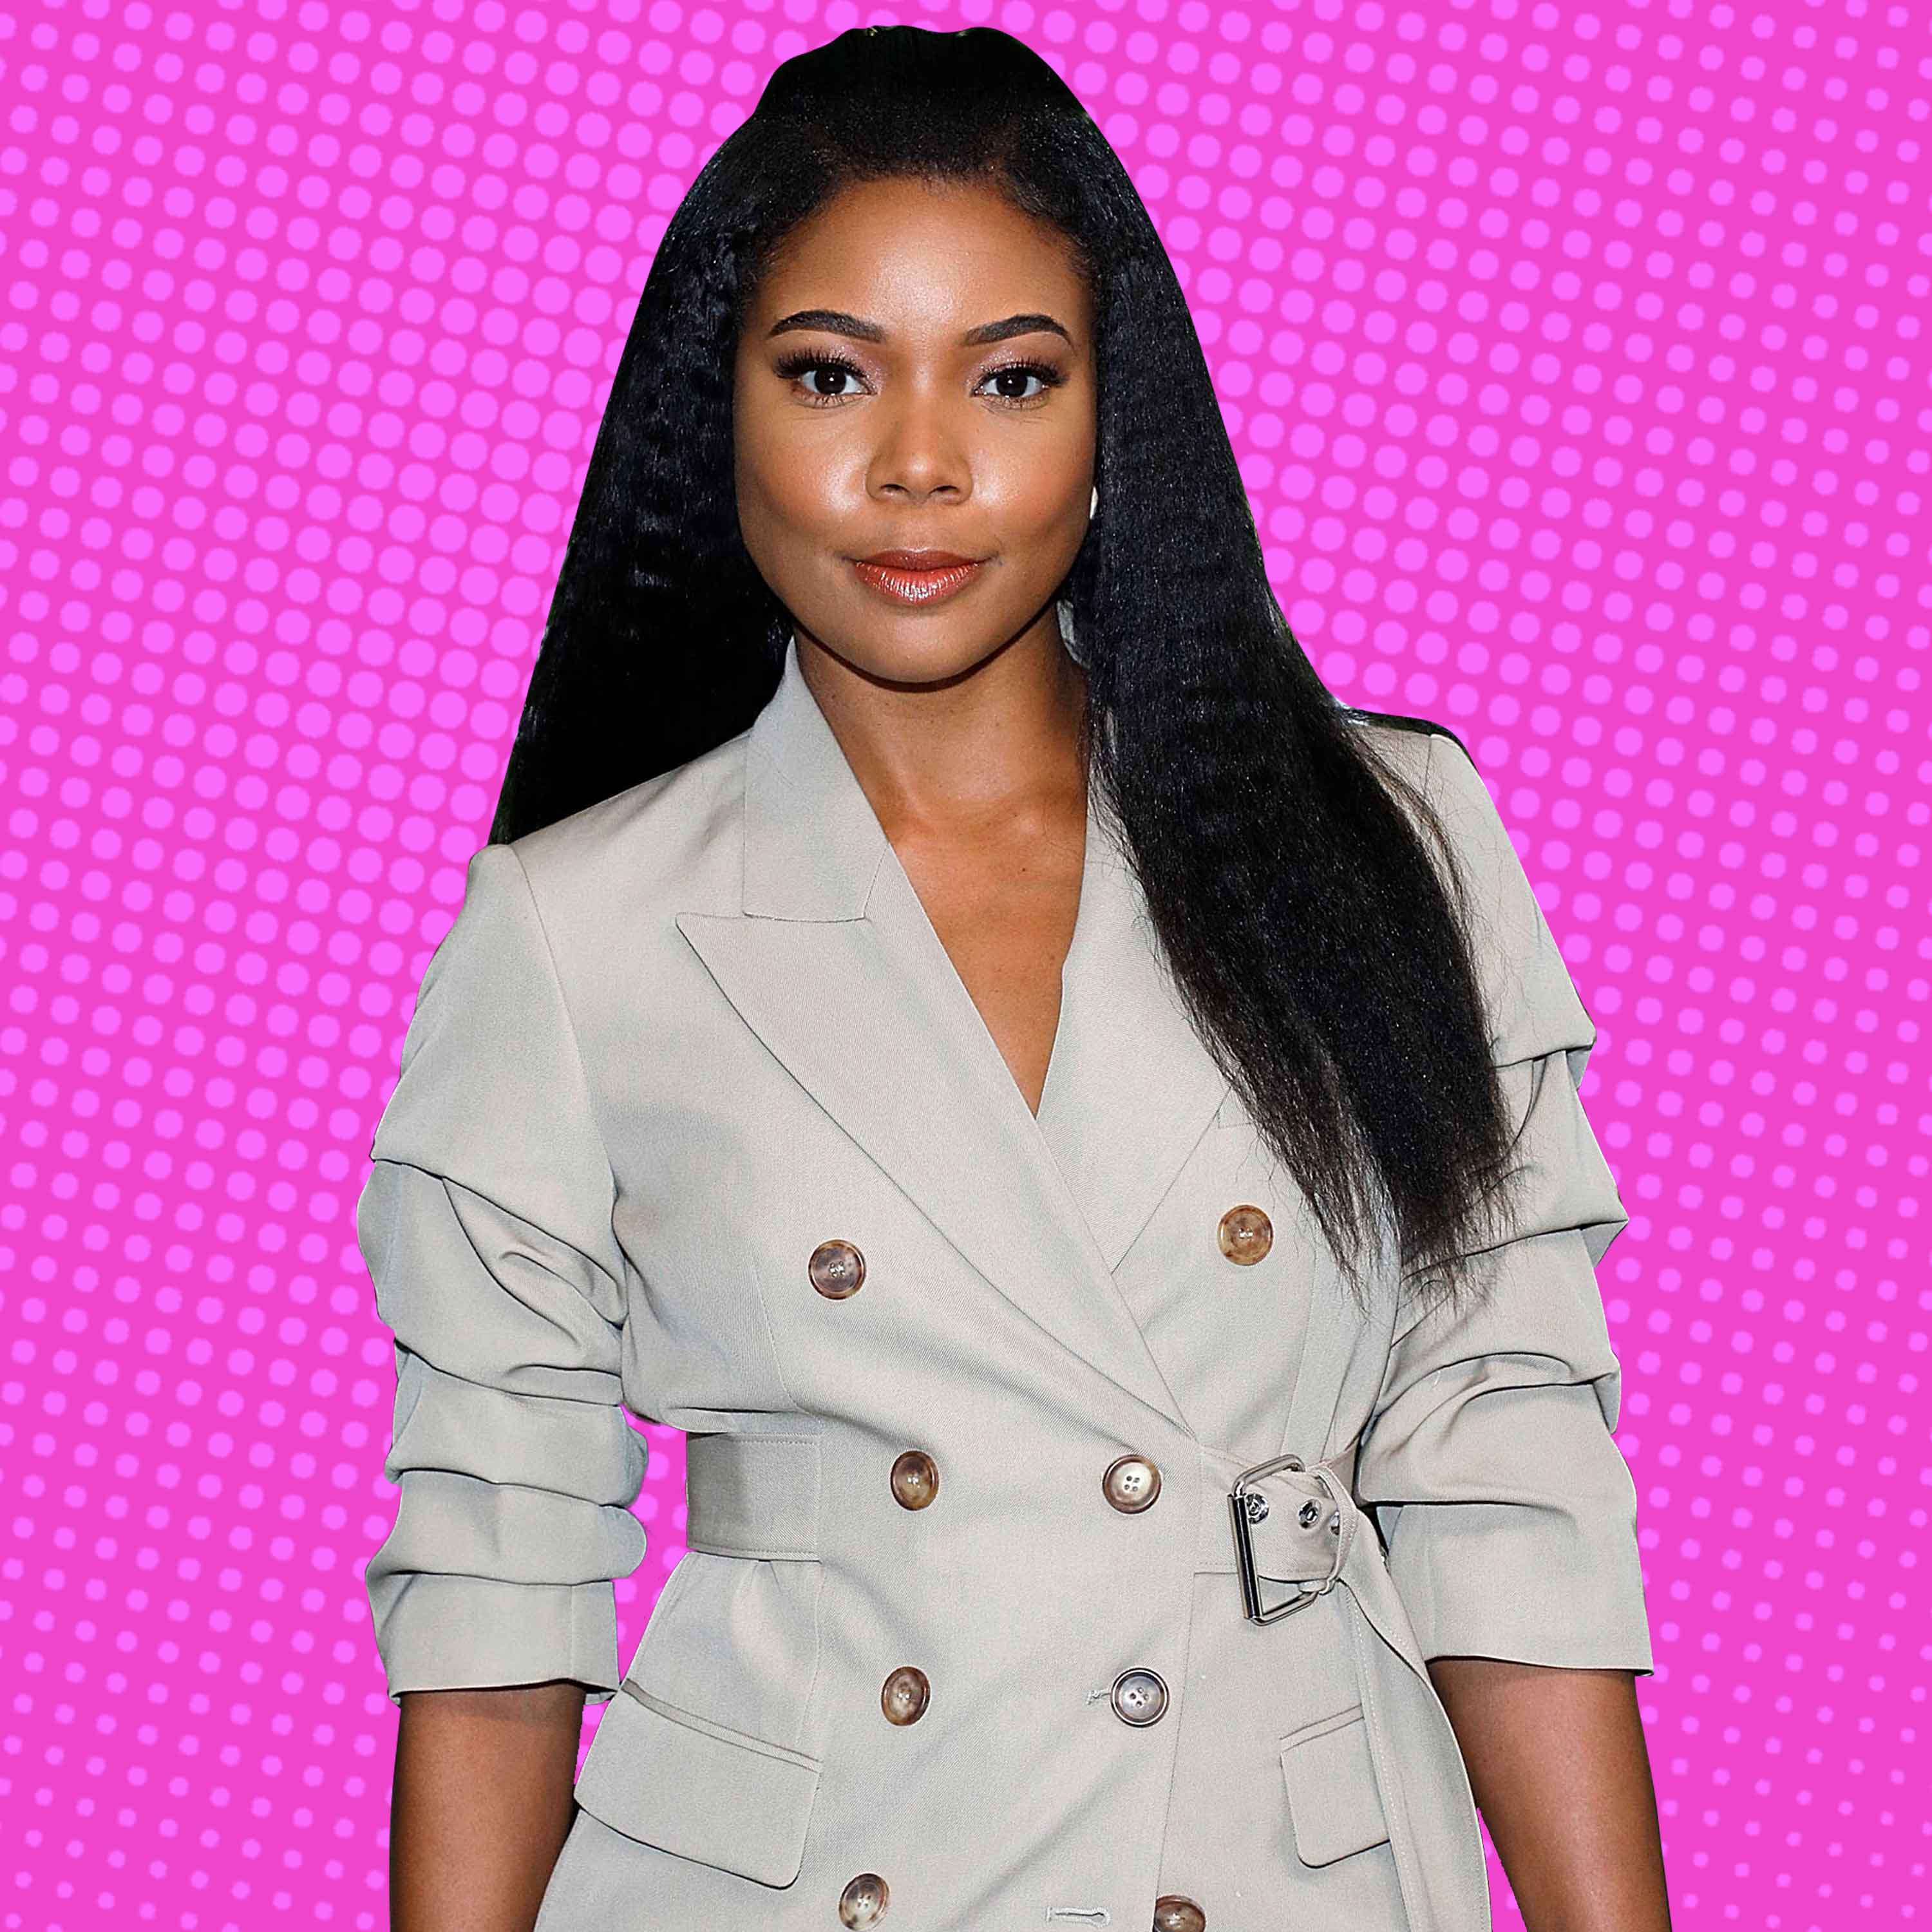 Gabrielle Union Talked Openly About Sexual Reciprocity And Twitter Freaked Out
